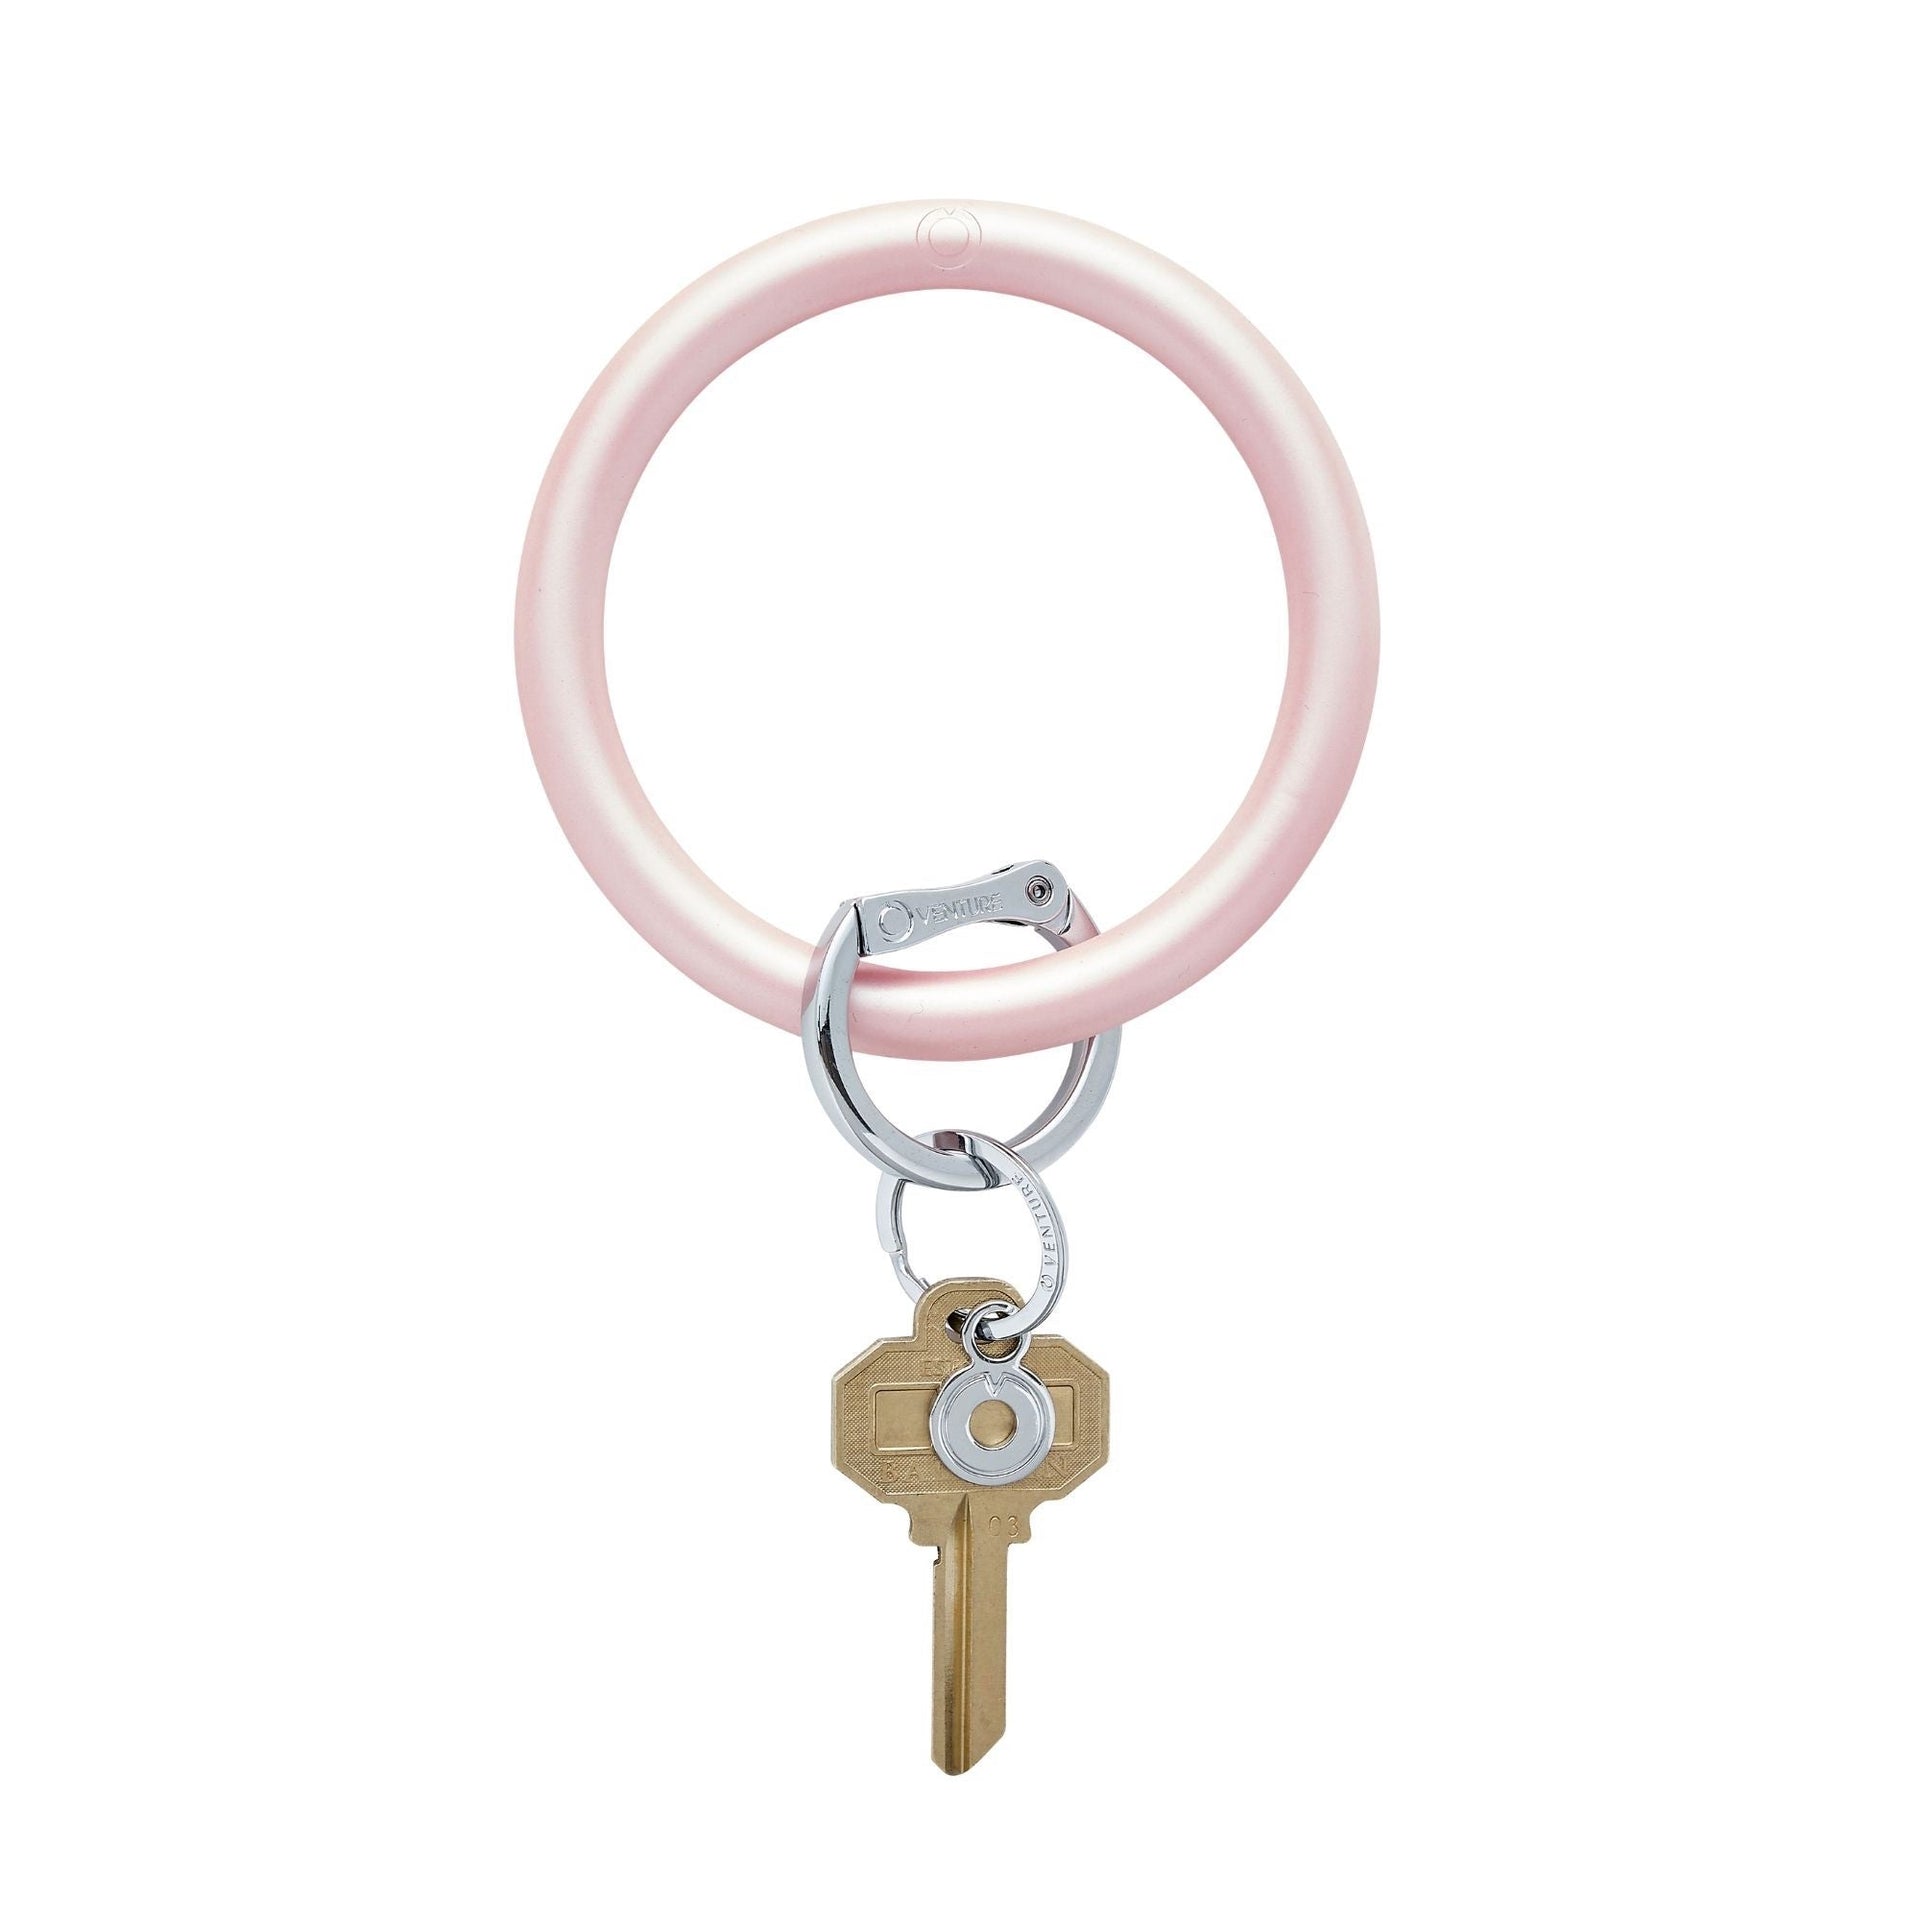 Big O Silicone Patterned Key Ring - The Old School